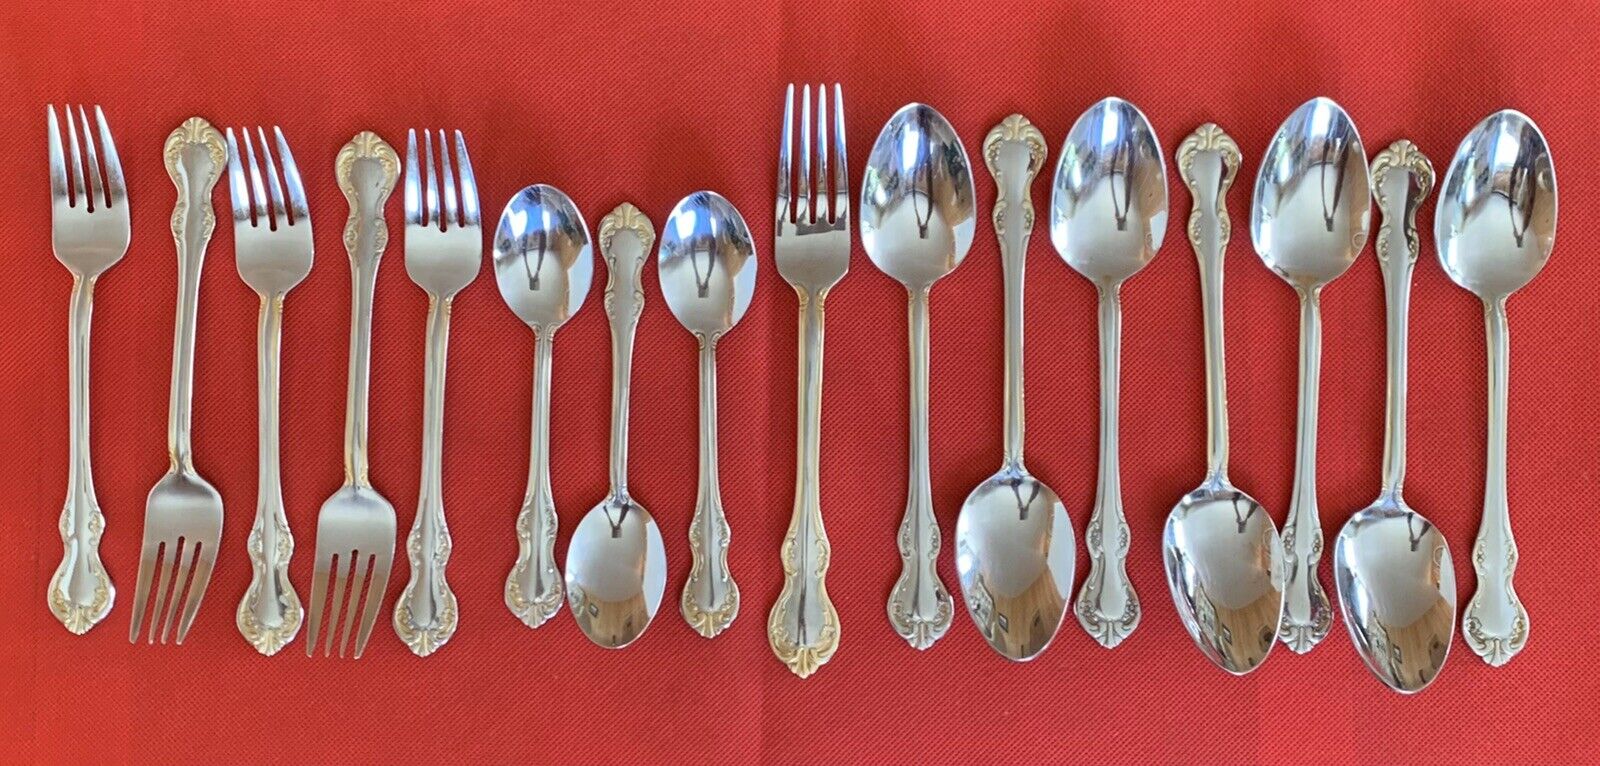 Cook’s Essentials Flatware Gold Tone Replacements 18/10 Stainless Steel